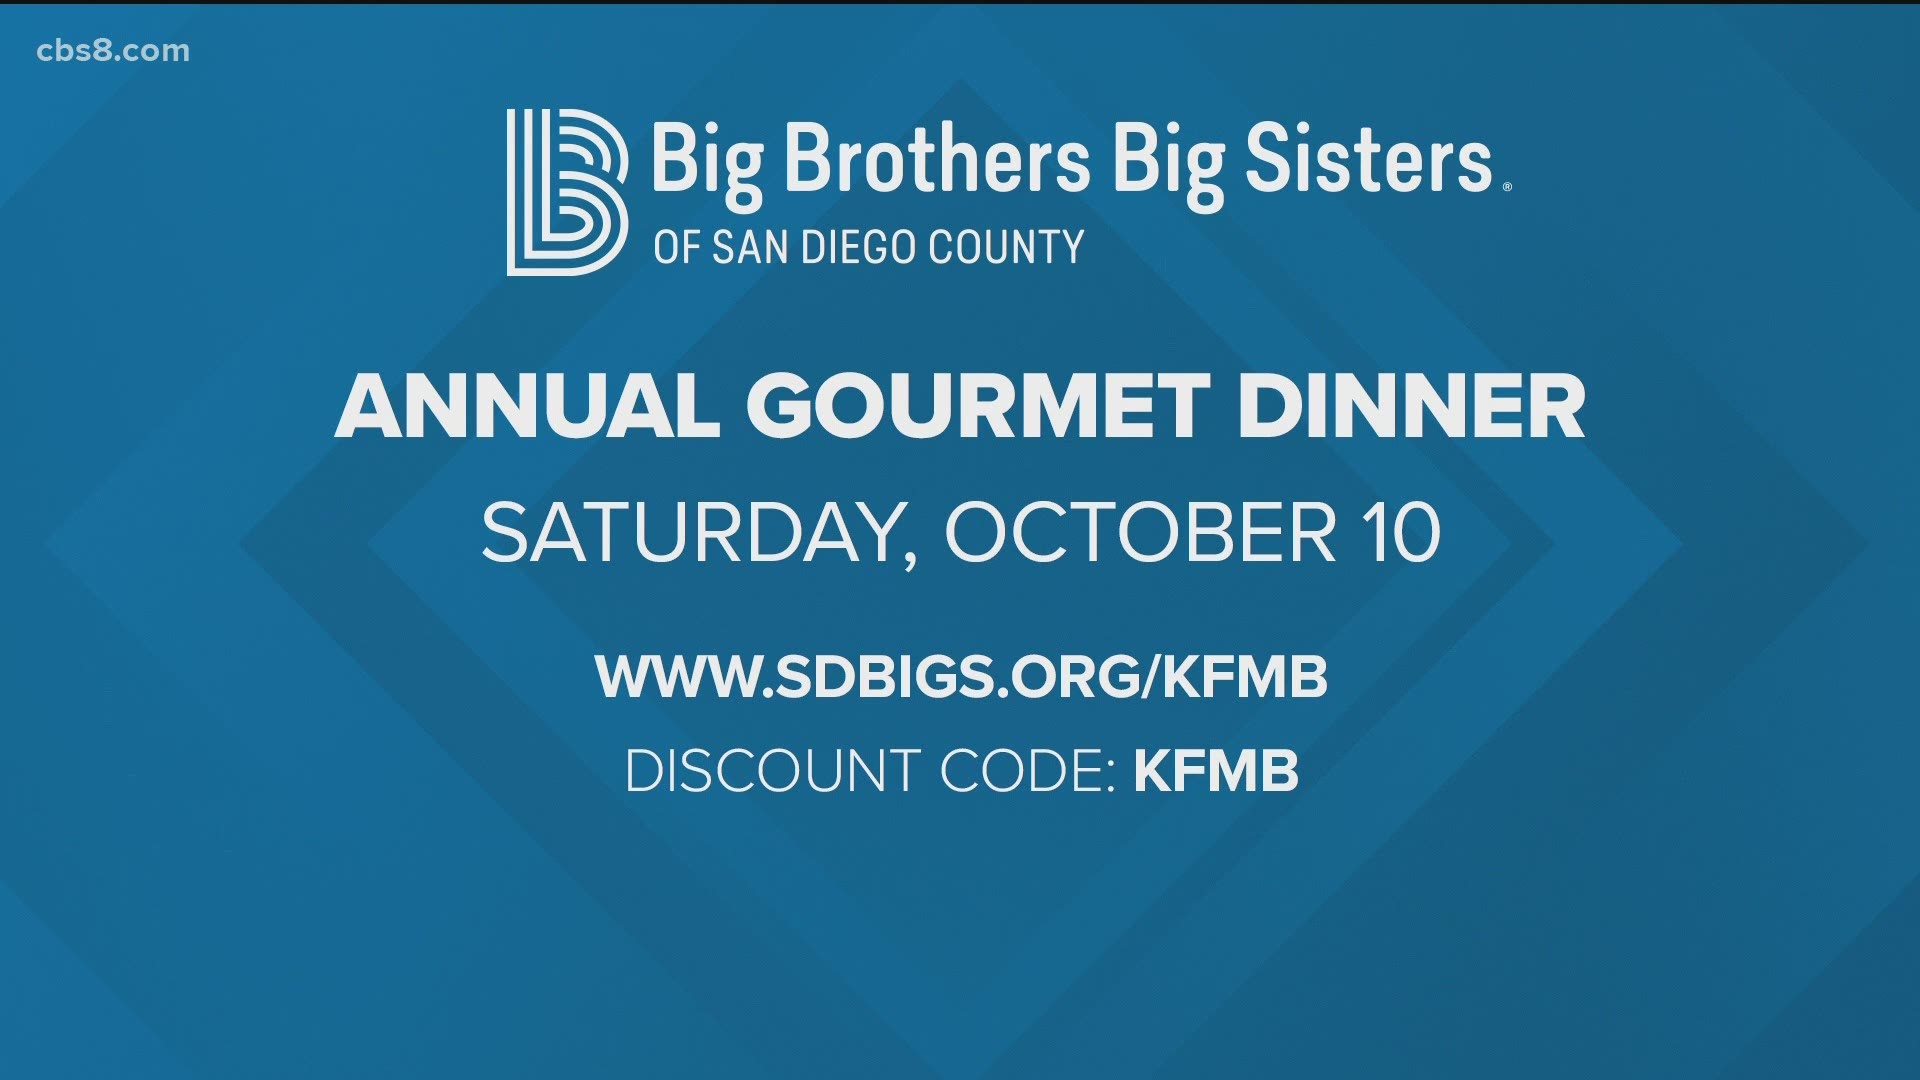 Bigs and littles alike are celebrating in San Diego this Saturday.  Use the discount code "KFMB"